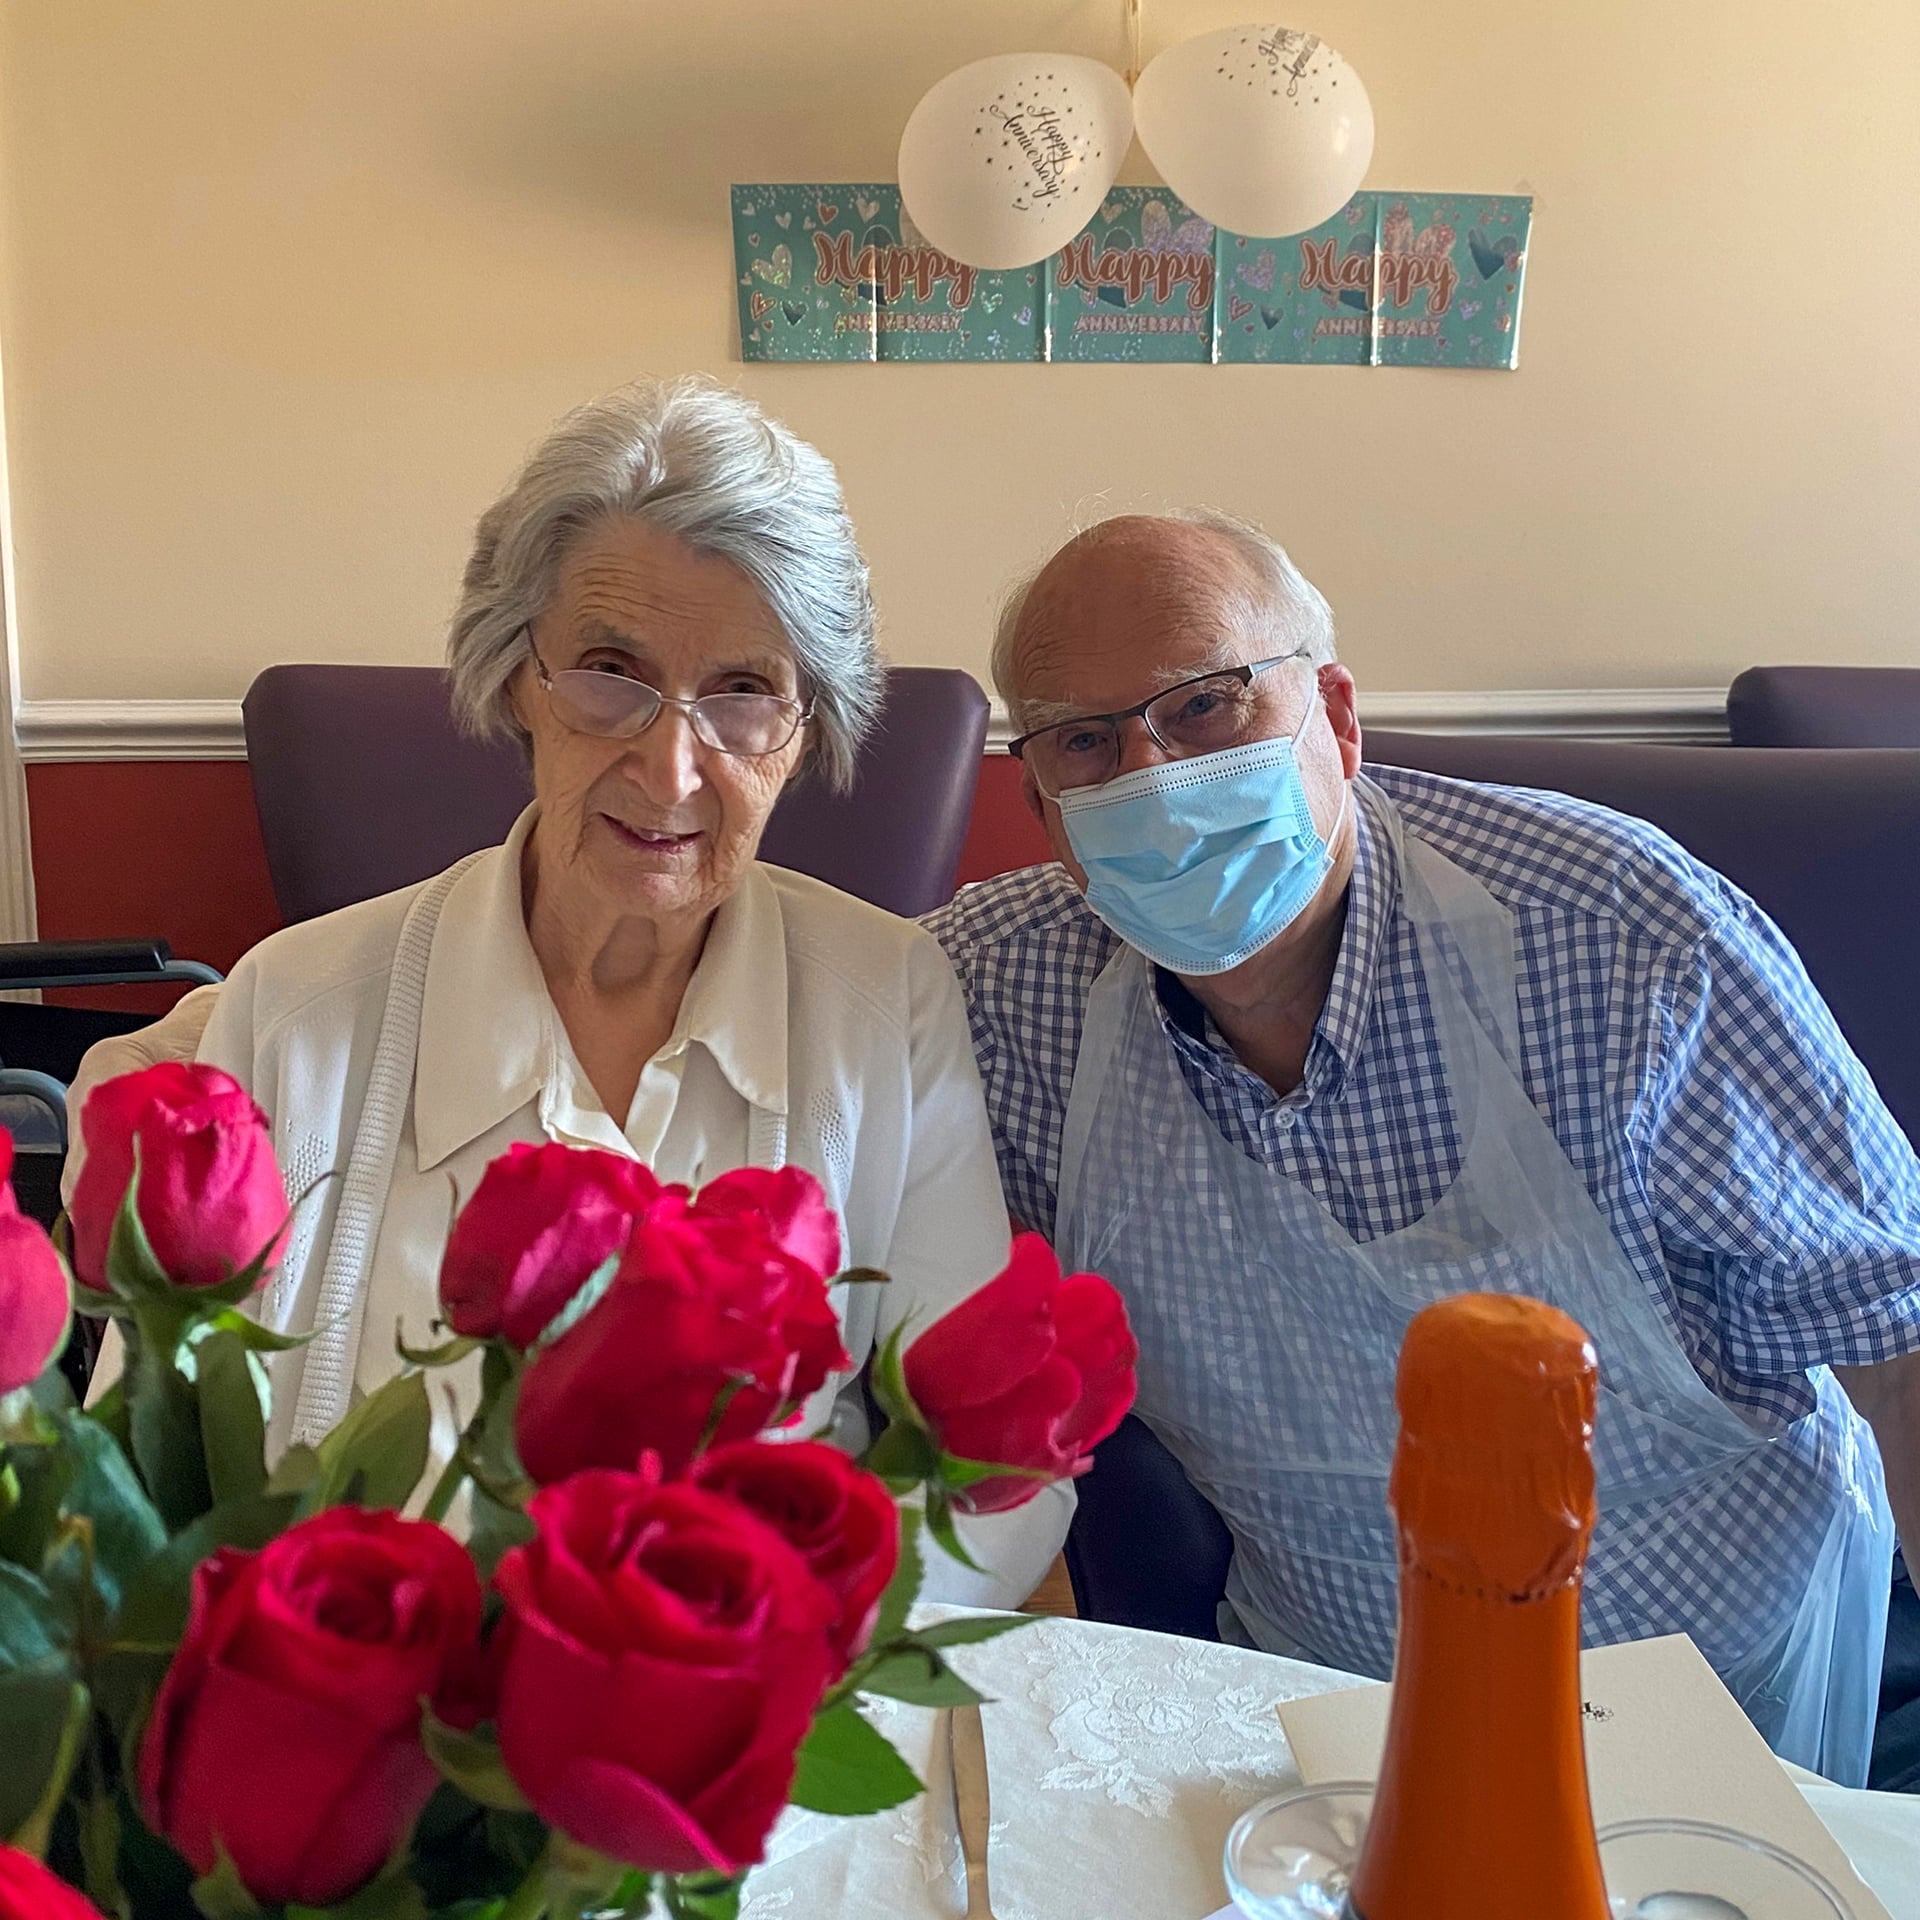 John and Sheila Chilvers celebrating their 65th wedding anniversary at Briar House Care Home in Kings Lynn.